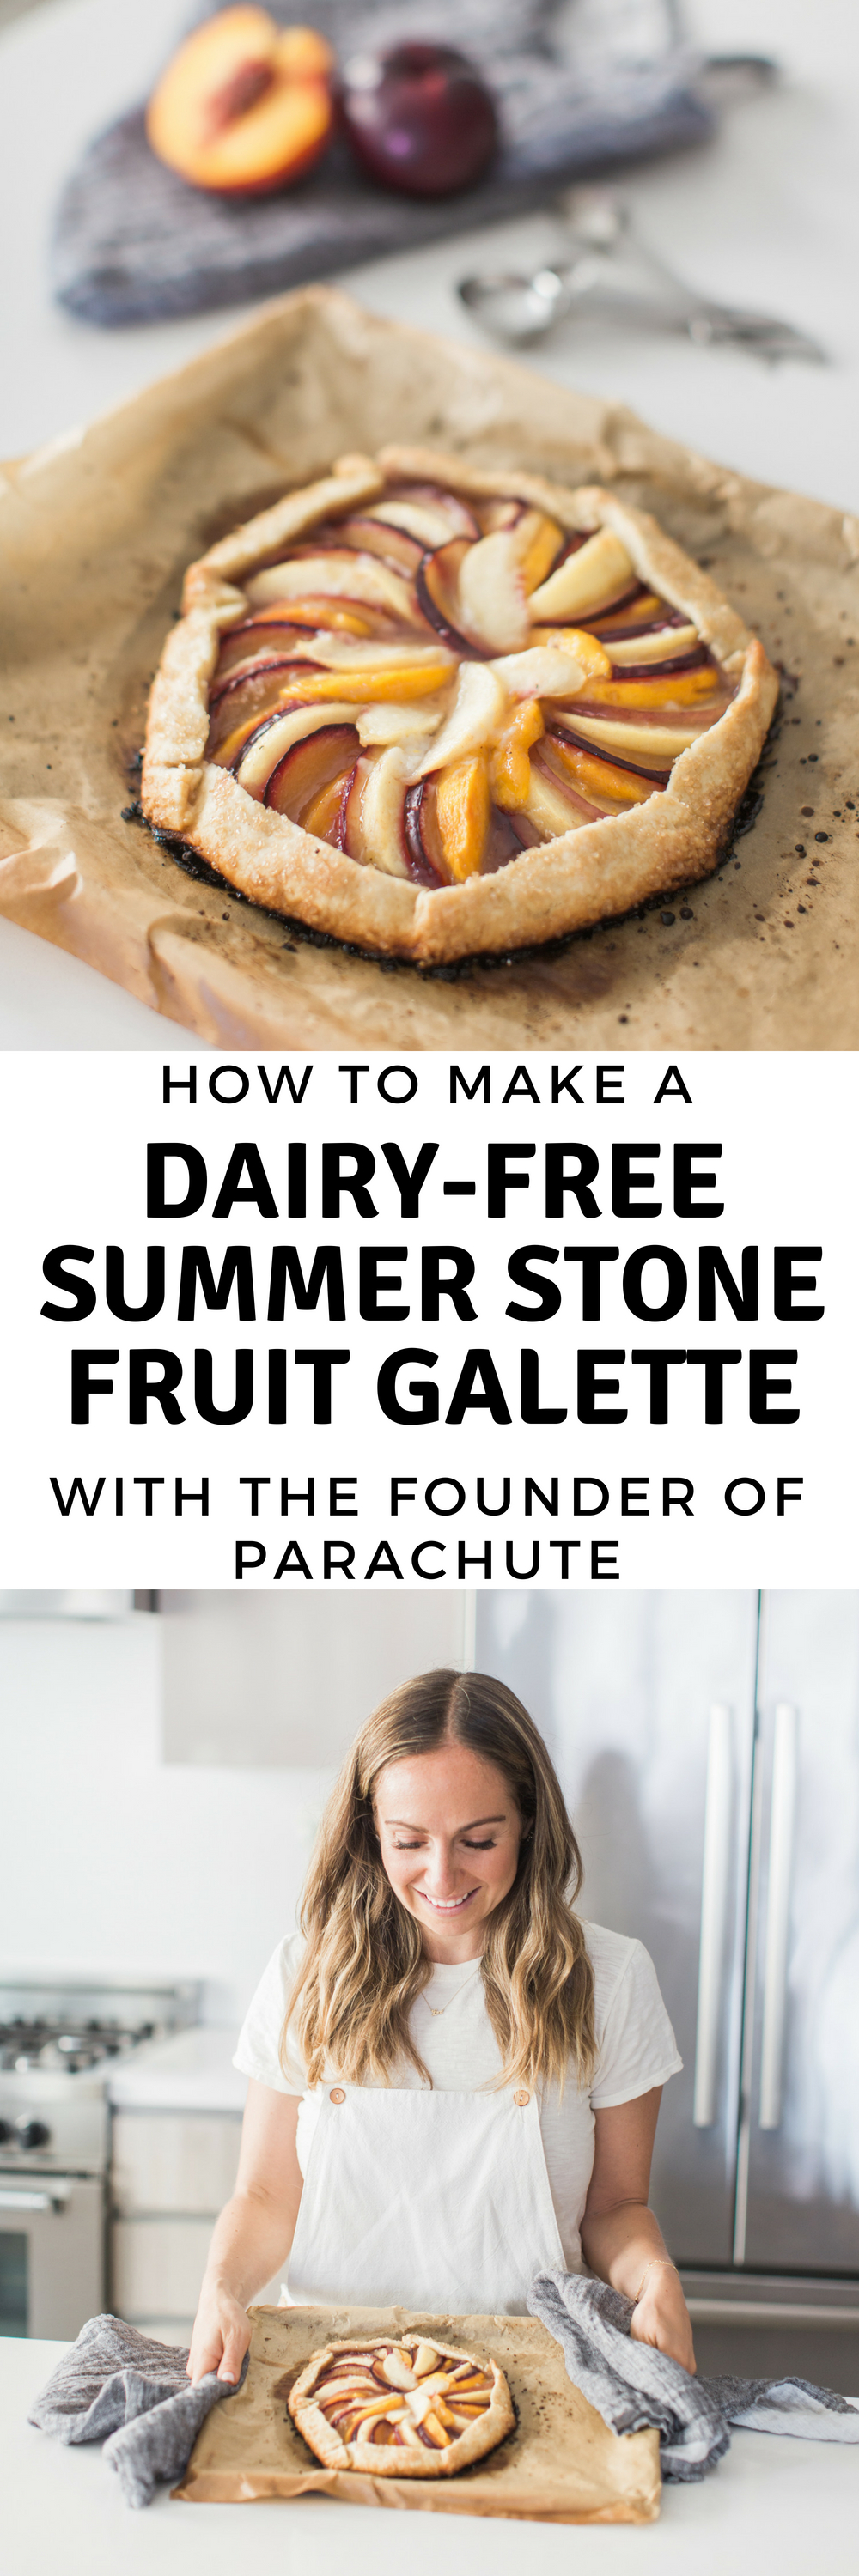 how to make a summer stone fruit galette with the founder of parachute